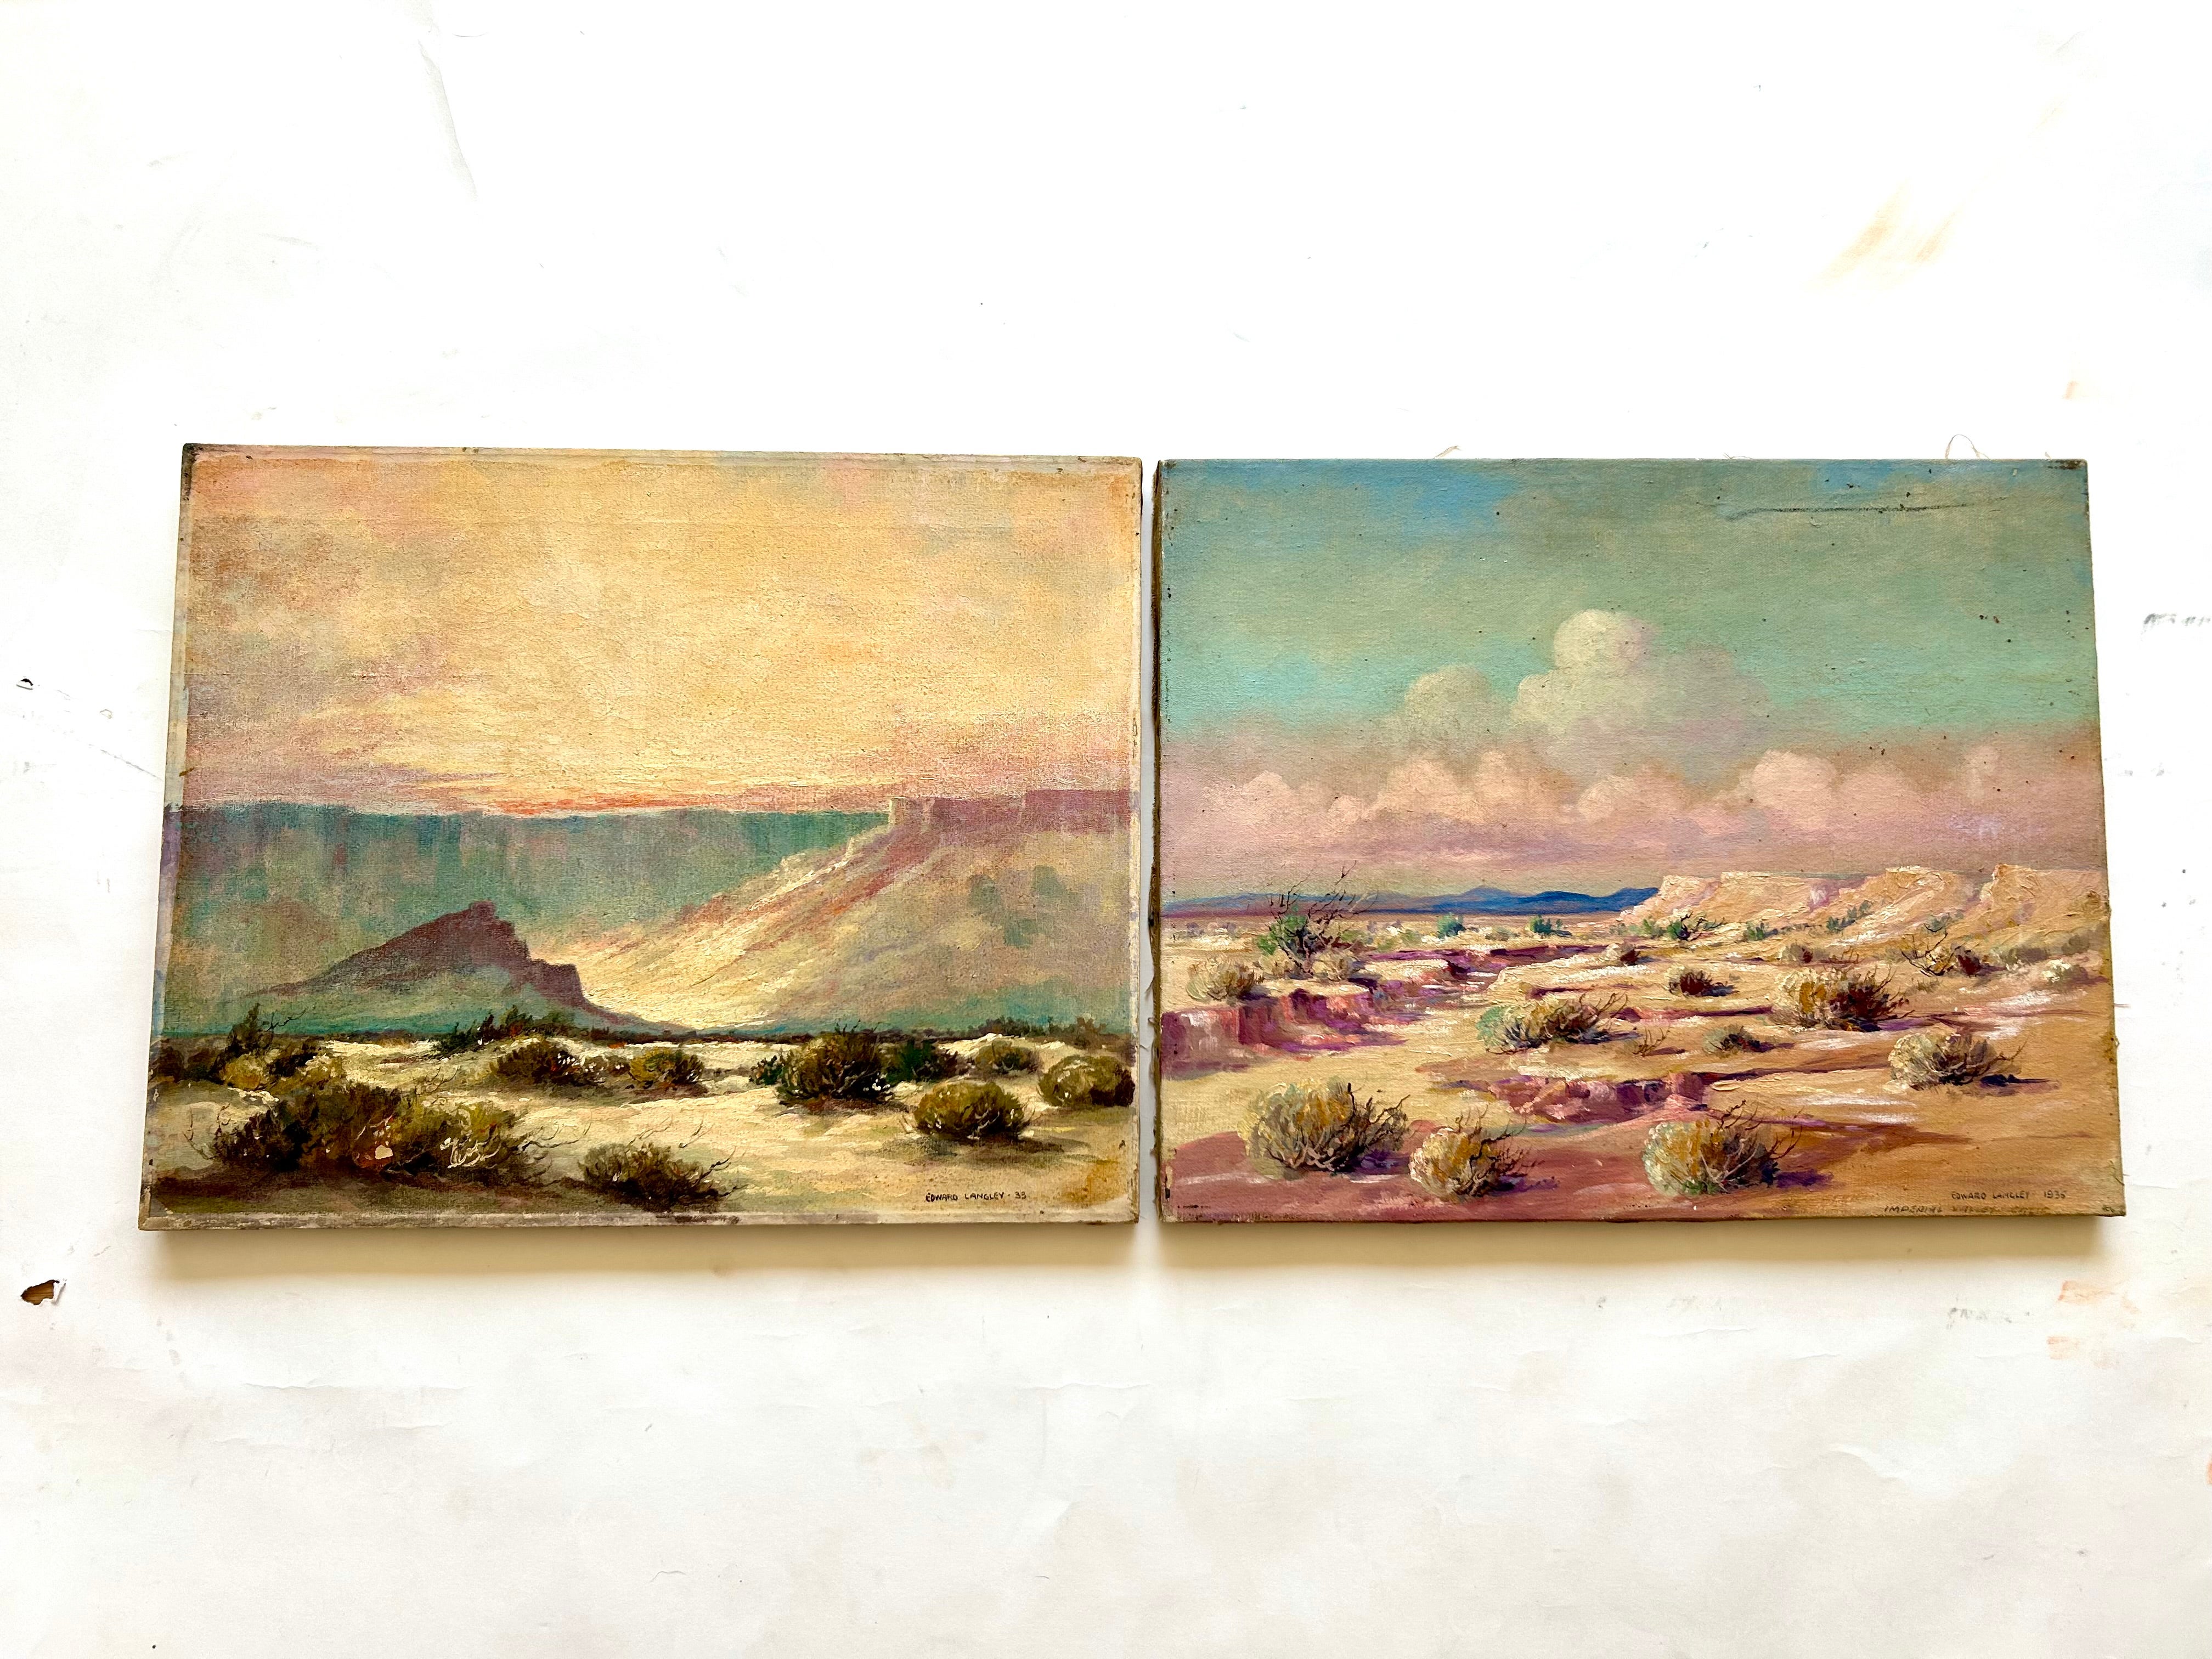 1870 - 1949
Mr. Langley was known for painting California Landscapes.
He had an adventurous and colorful life.
He floated around California working as an art teacher, was a prisoner of war and worked at the Hollywood studios. 
He was a prolific